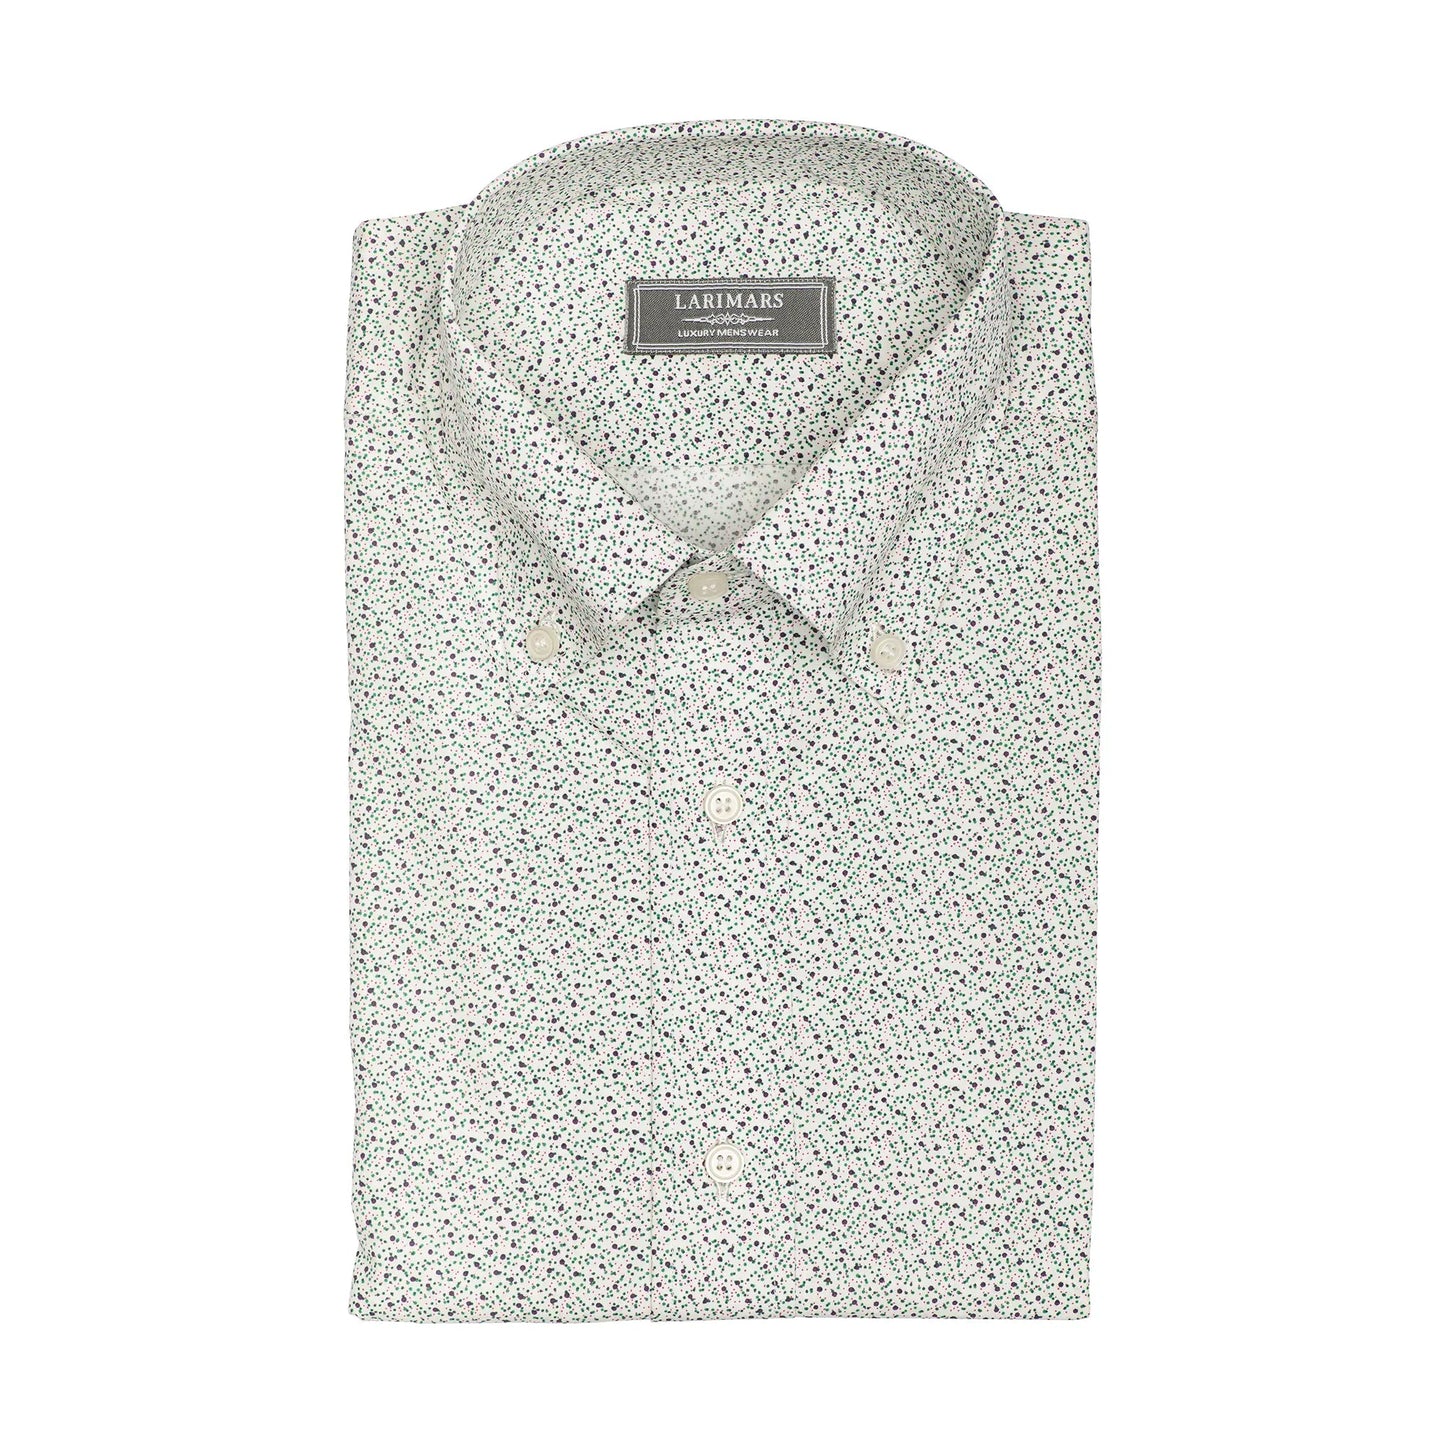 Multi Color Dot Print - Larimars Clothing Men's Formal and casual wear shirts